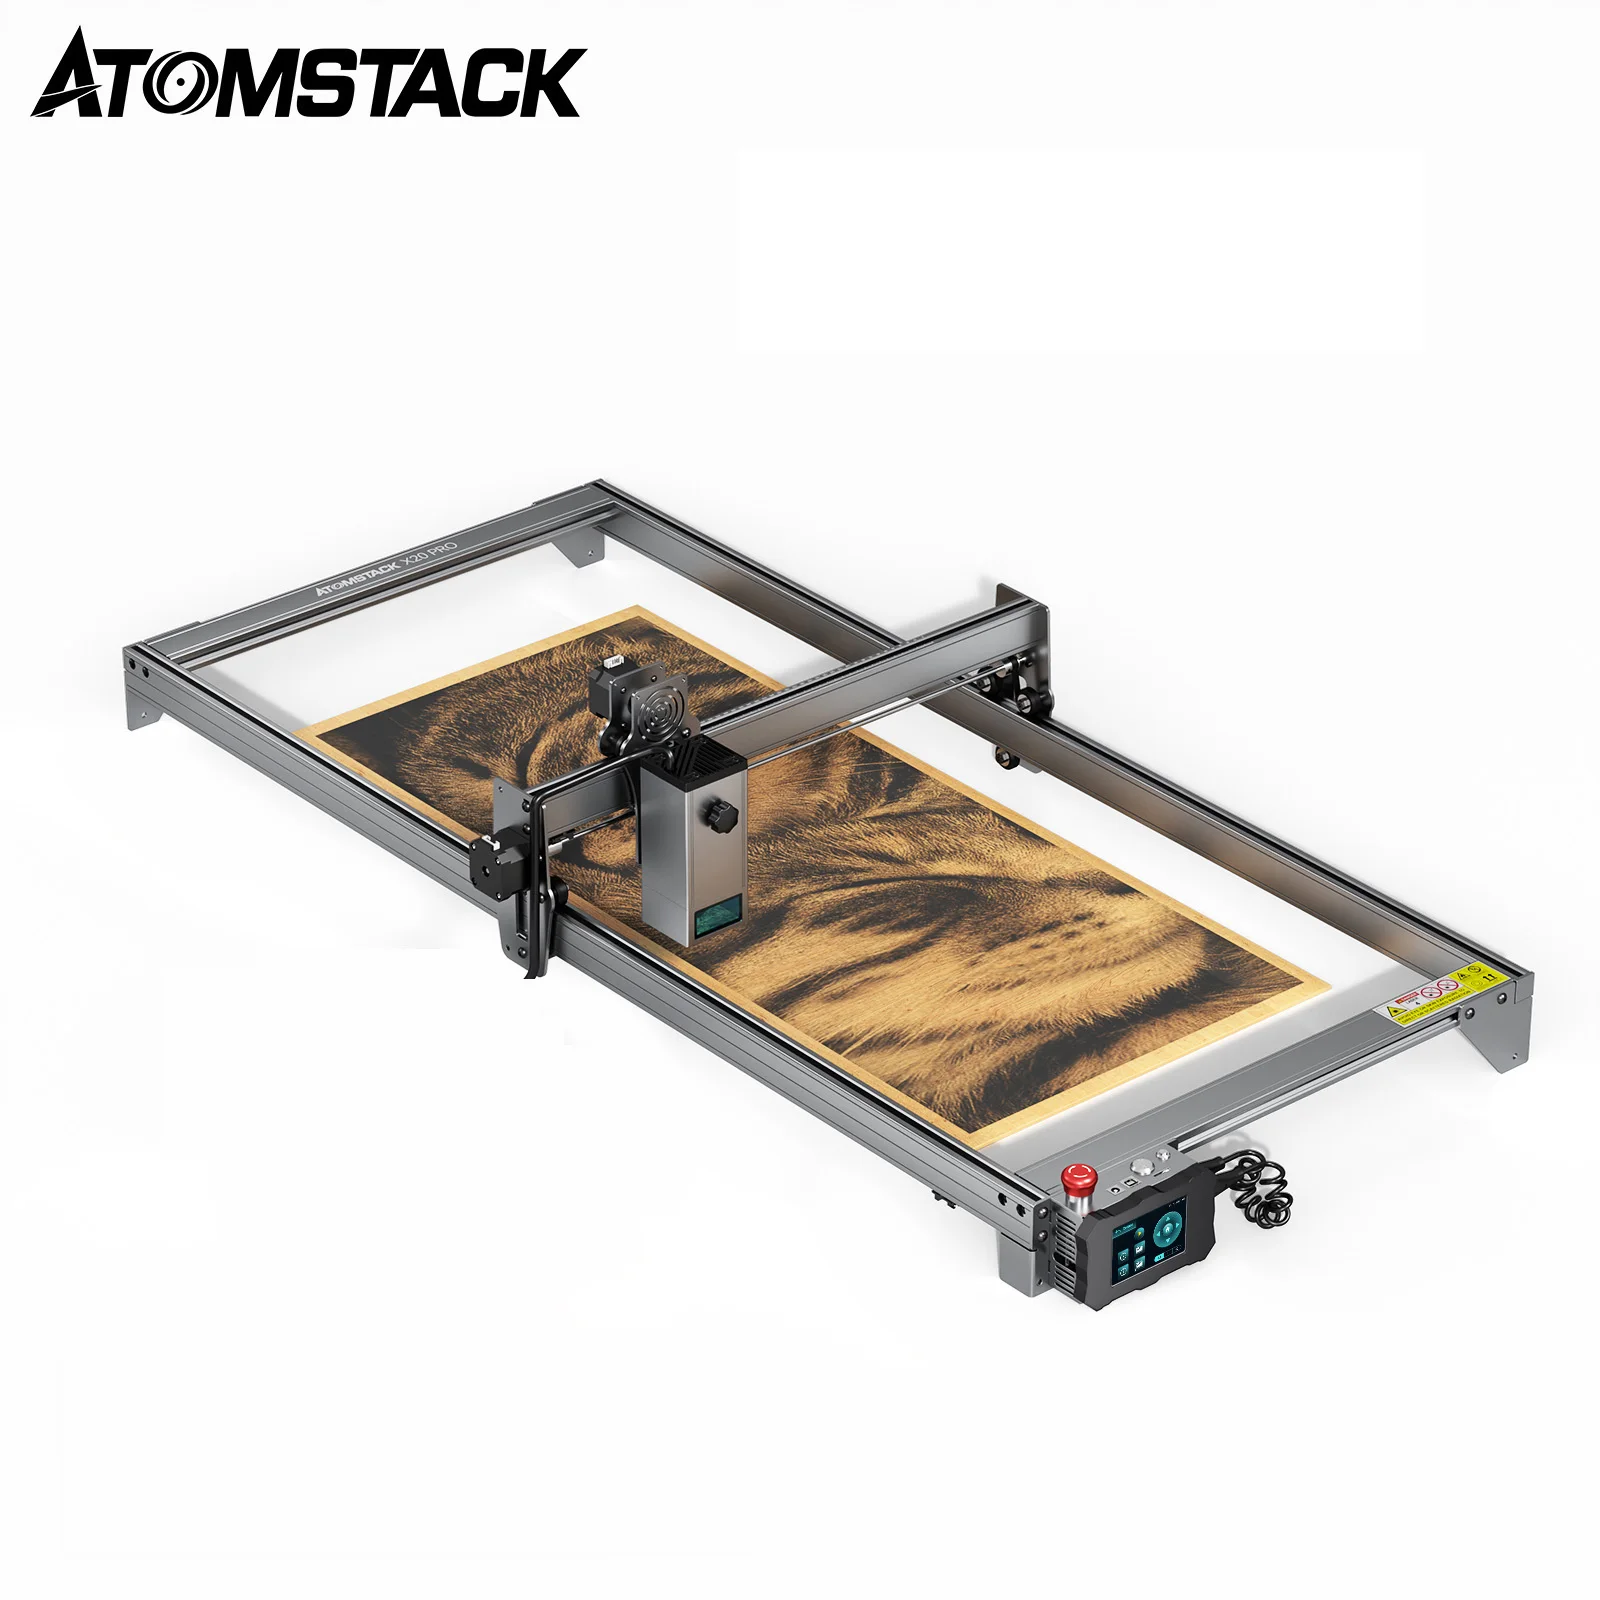 

ATOMSTACK Y-axis Extension Shaft for Atomstack X20 Pro/A20 Pro/S20 Pro 130W Laser Engraver Working Area to 850*400 Expansion Rod